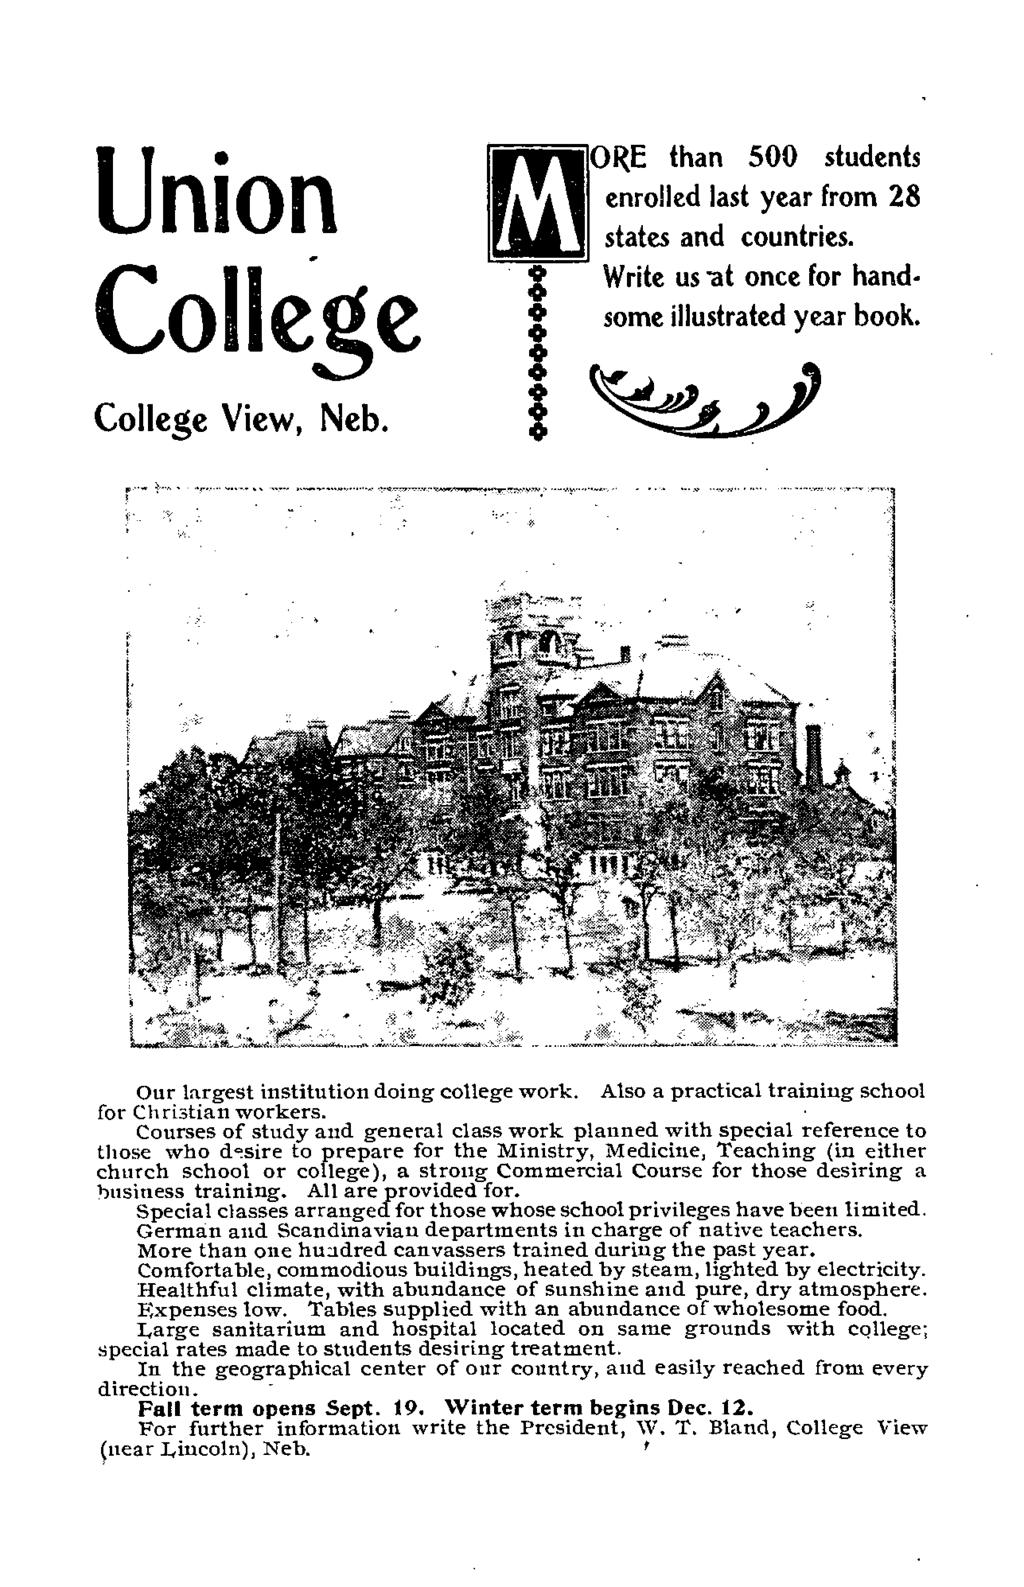 Union College M ORE than 500 students enrolled last year from 28 states and countries. Write us at once for hand- * some illustrated year book. College View, Neb.